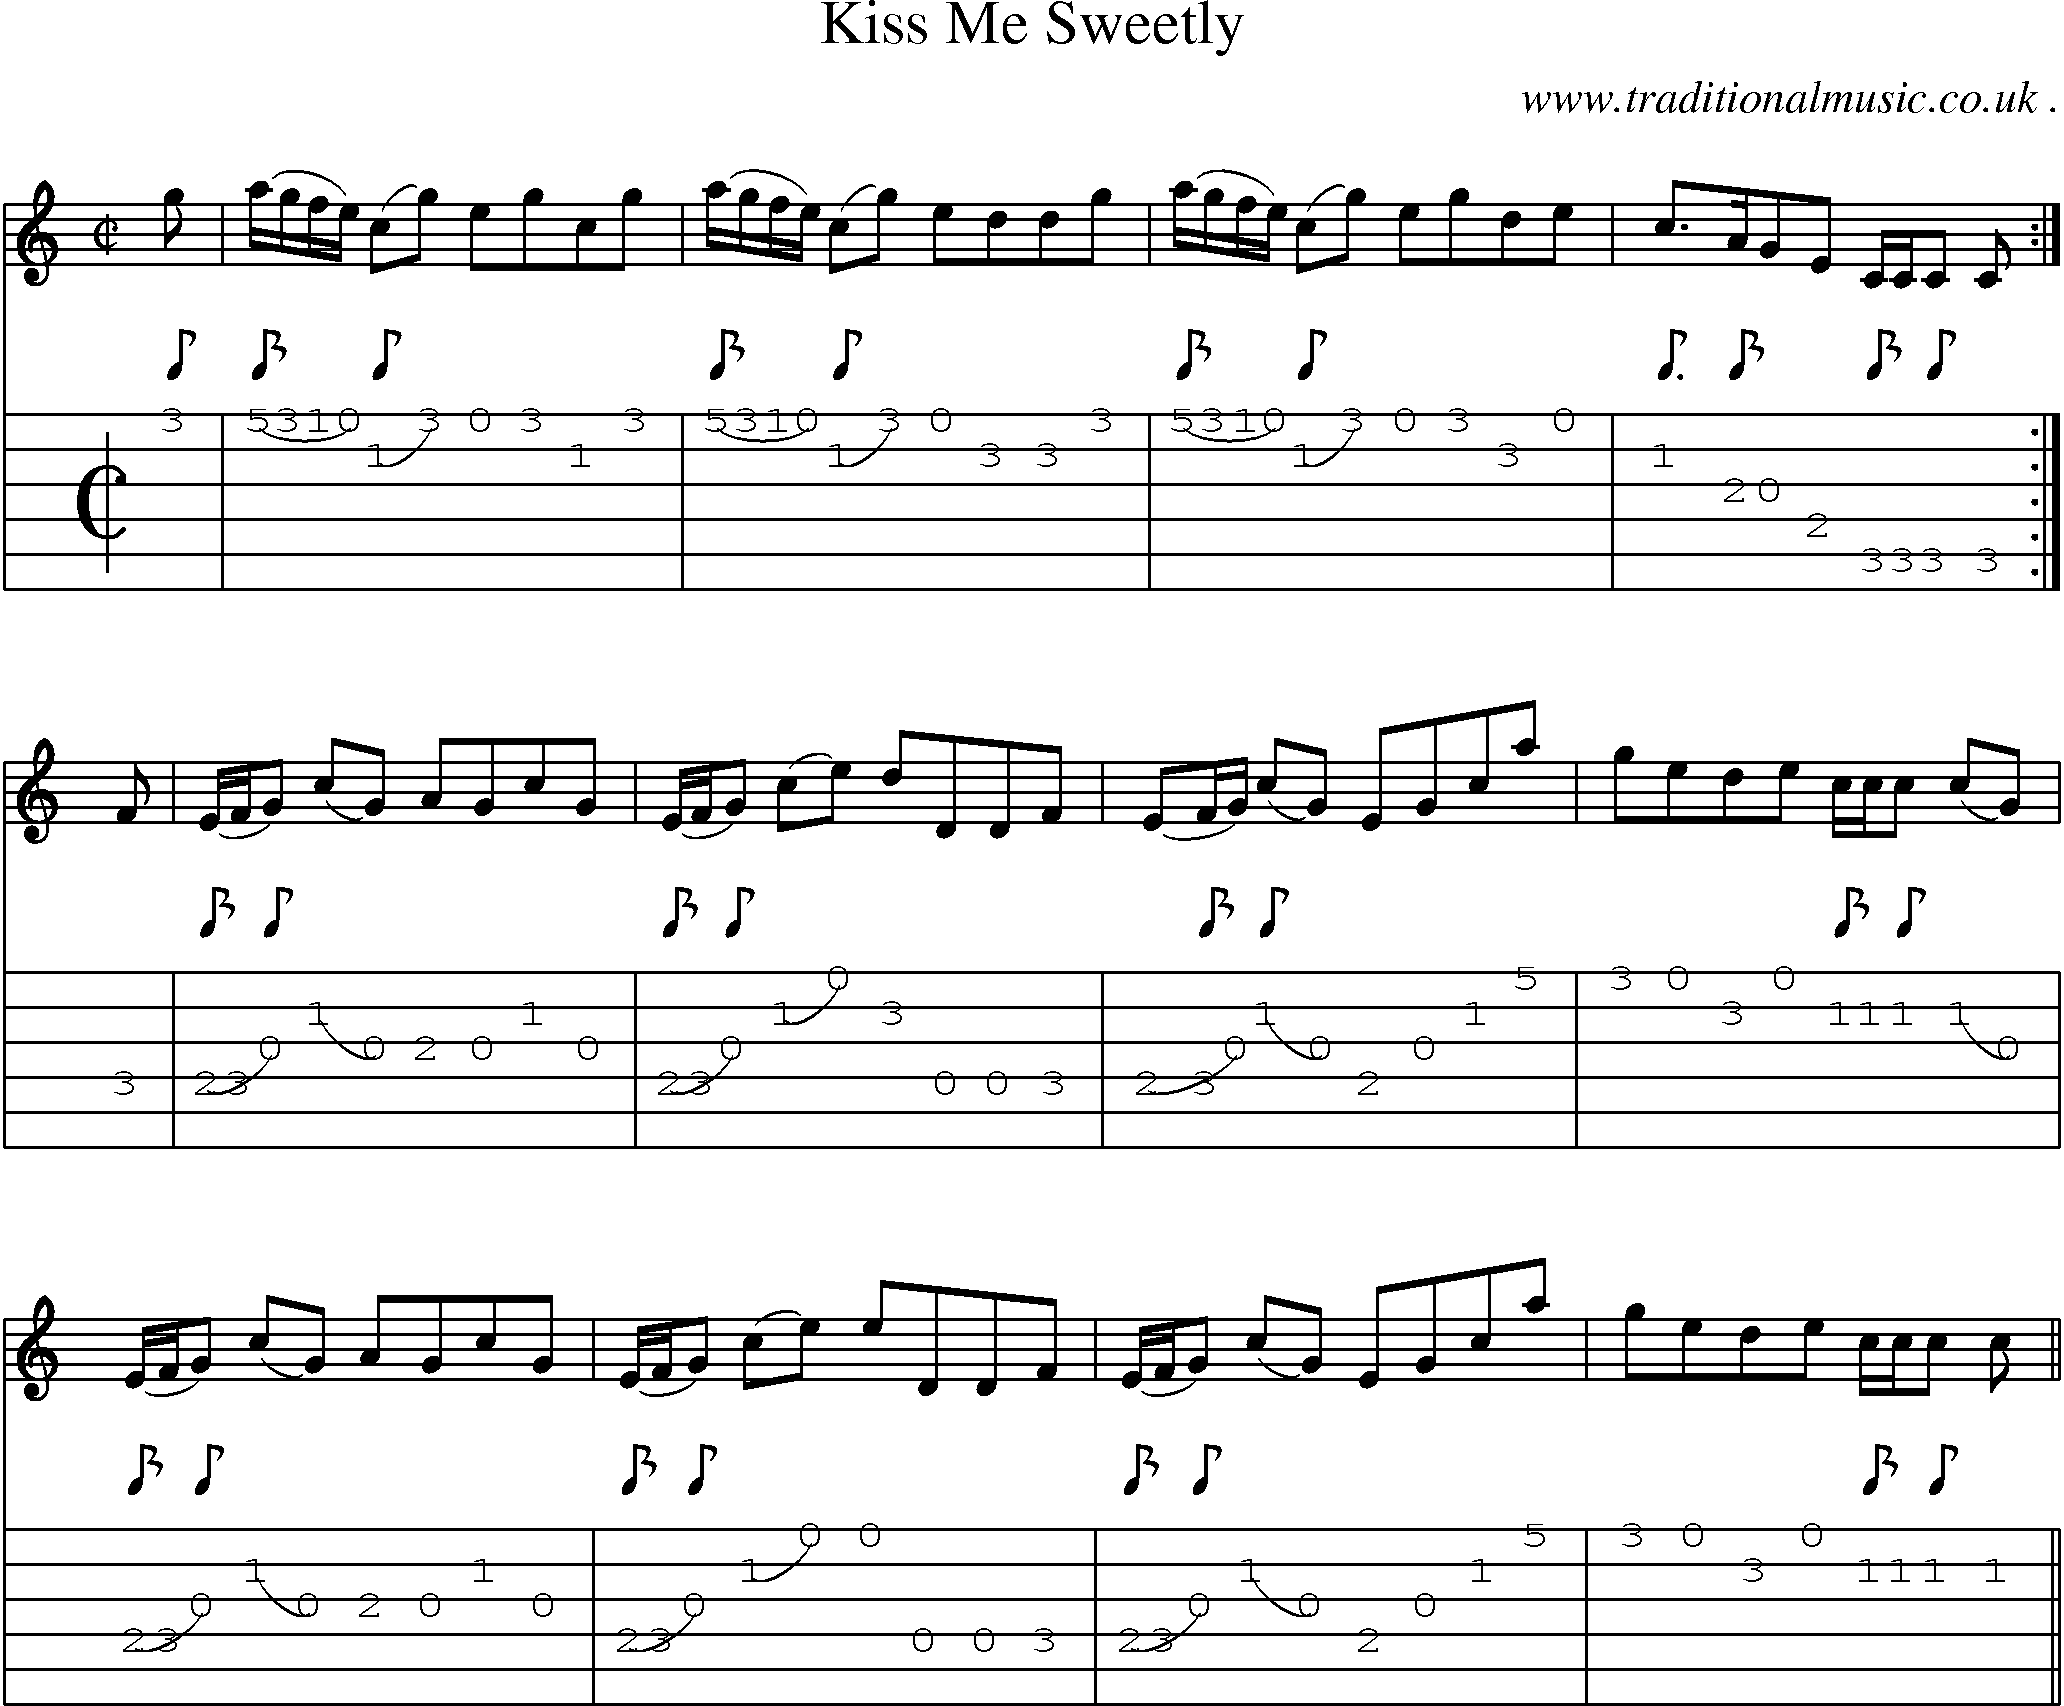 Sheet-music  score, Chords and Guitar Tabs for Kiss Me Sweetly